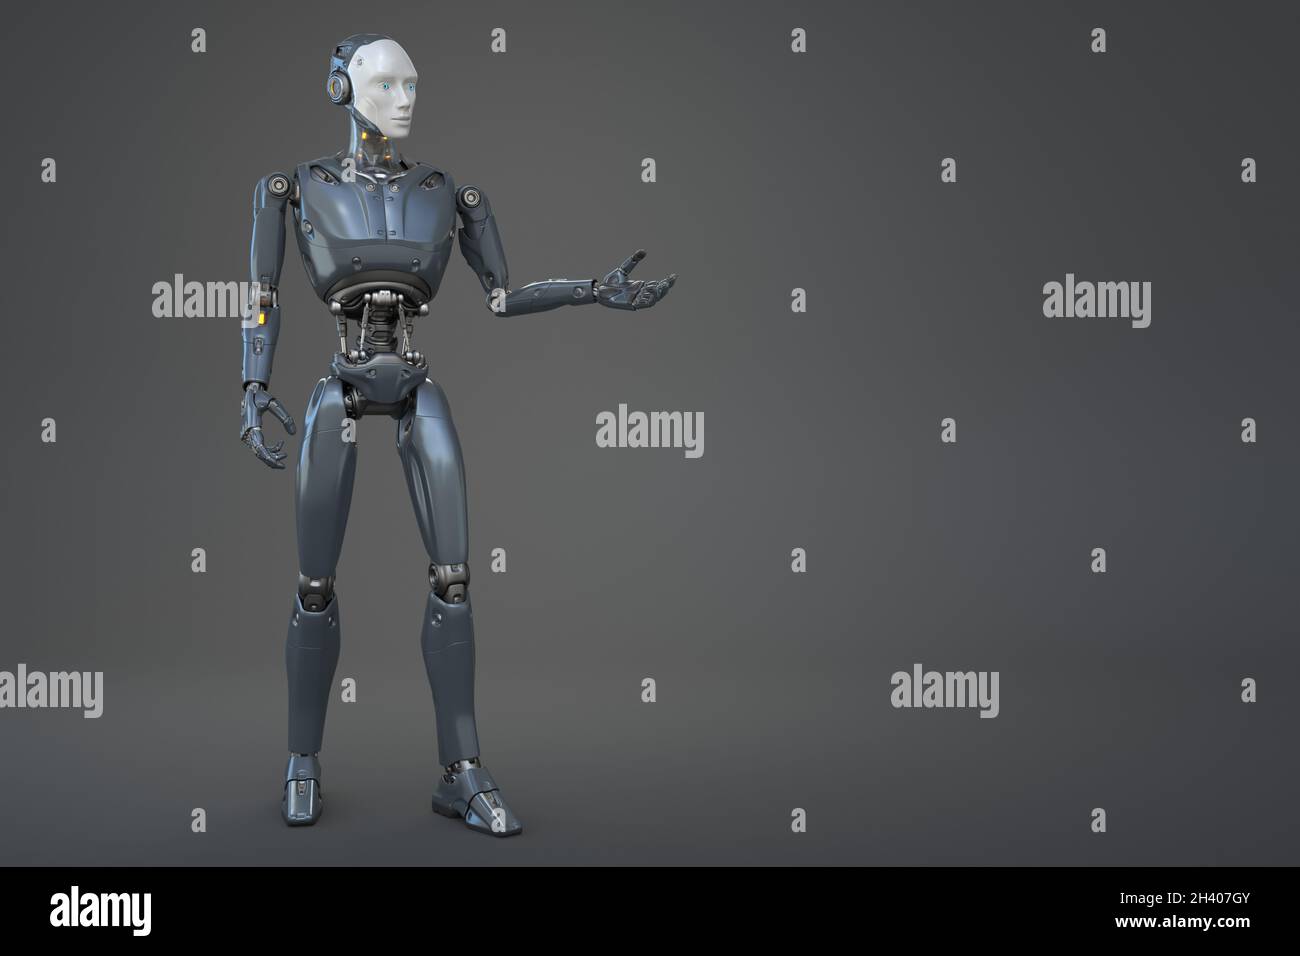 Robot android posing on a gray background. 3D illustration Stock Photo